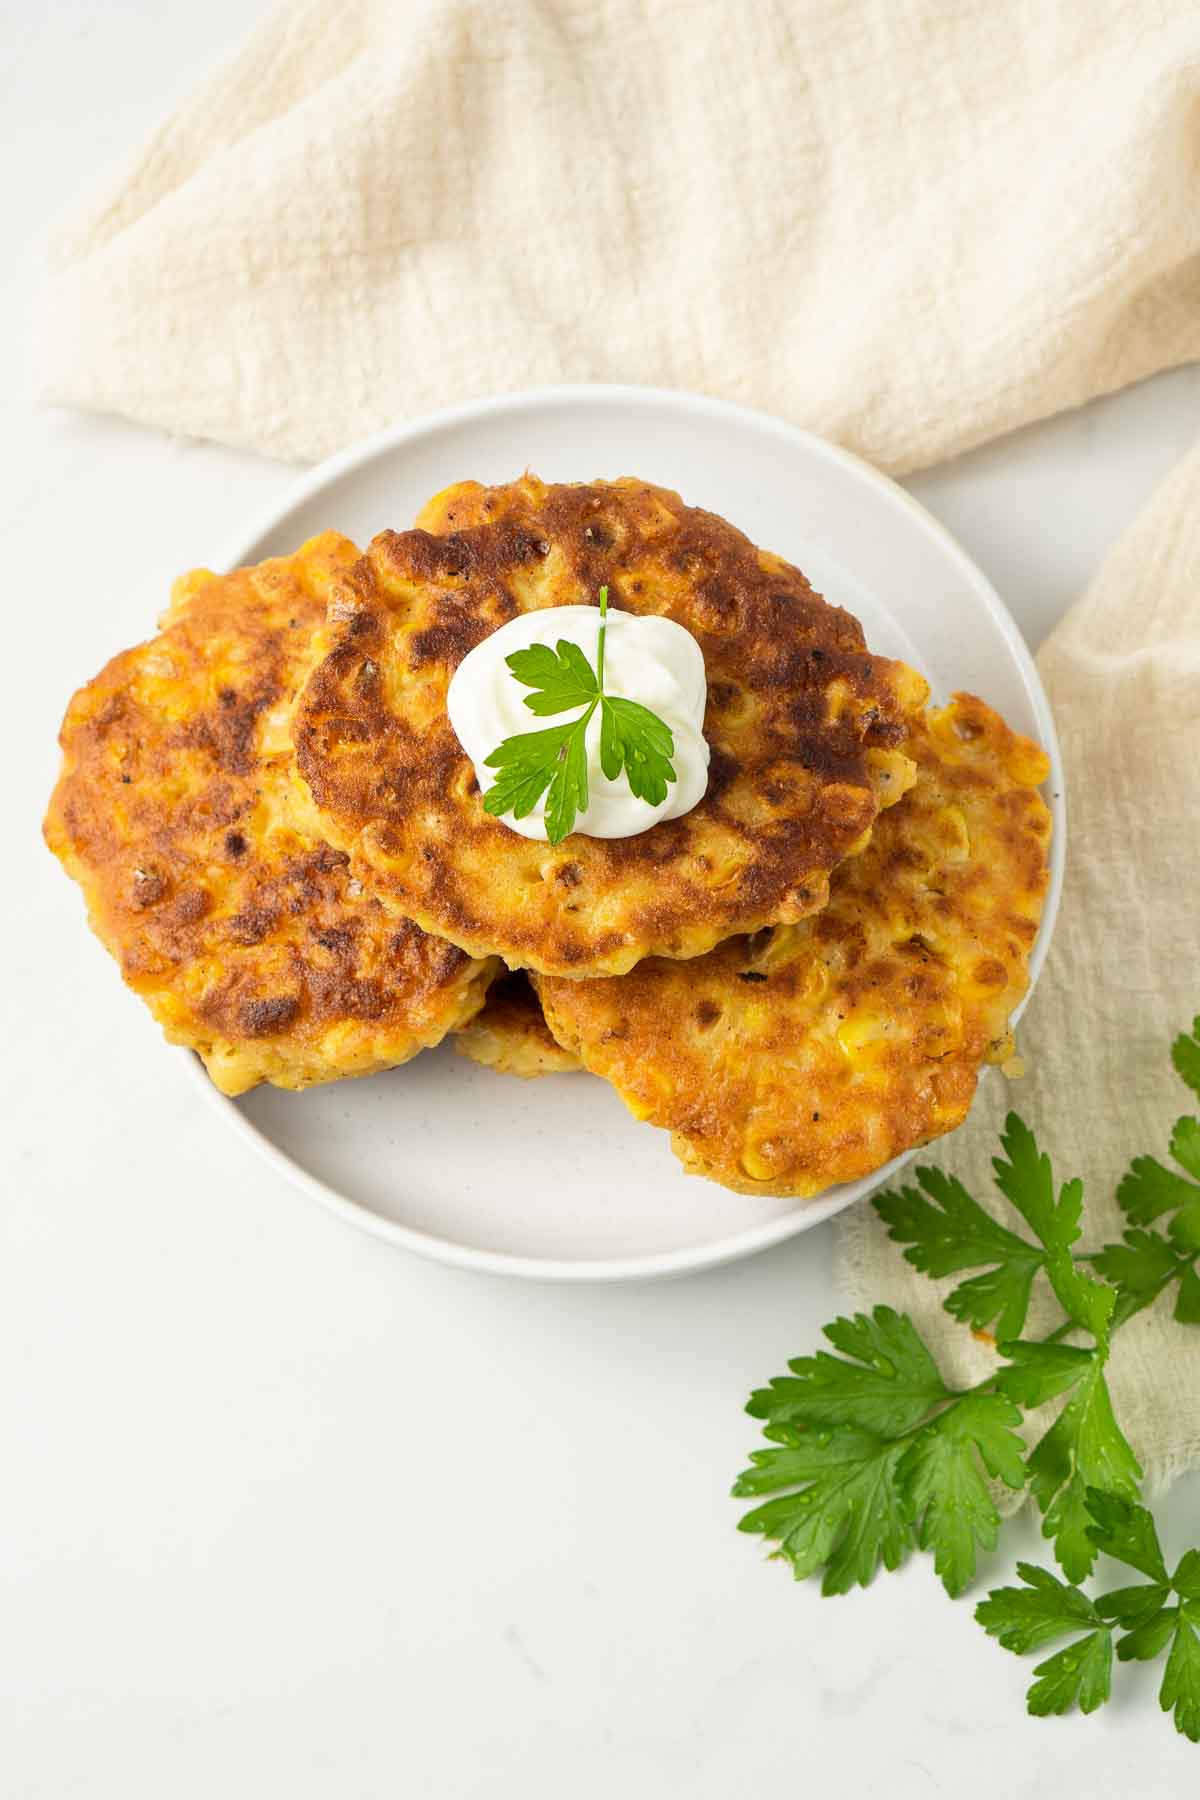 Corn fritters on a plate.